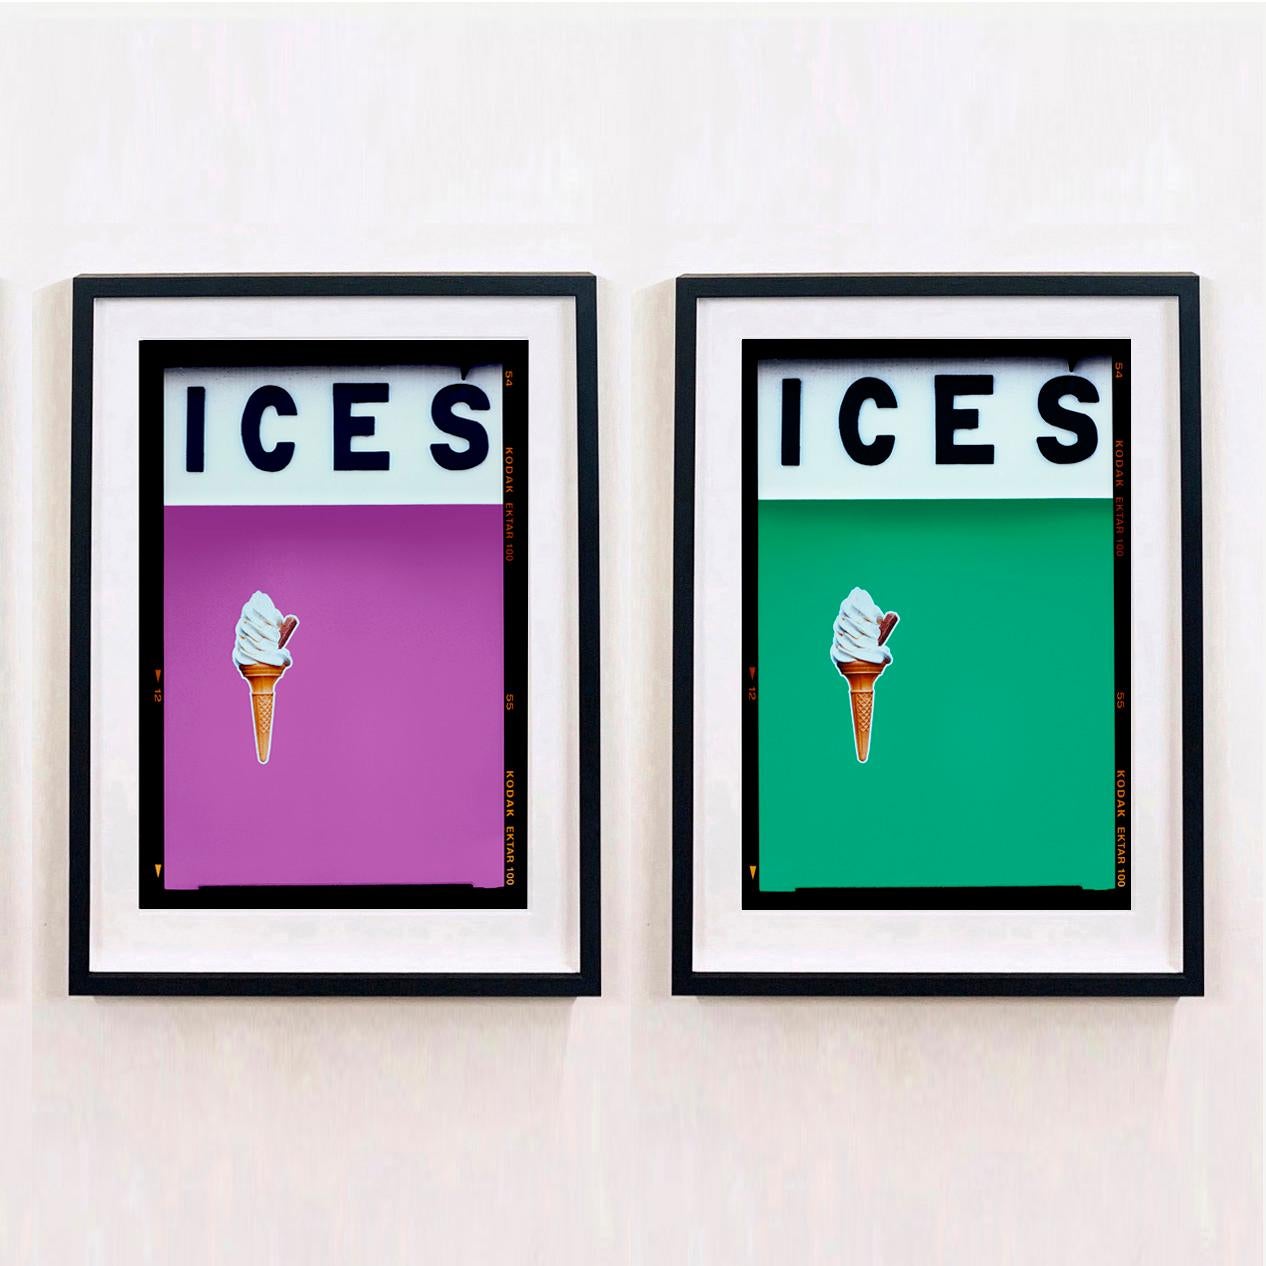 Ices (Viridian Green), Bexhill-on-Sea - British seaside color photography For Sale 1